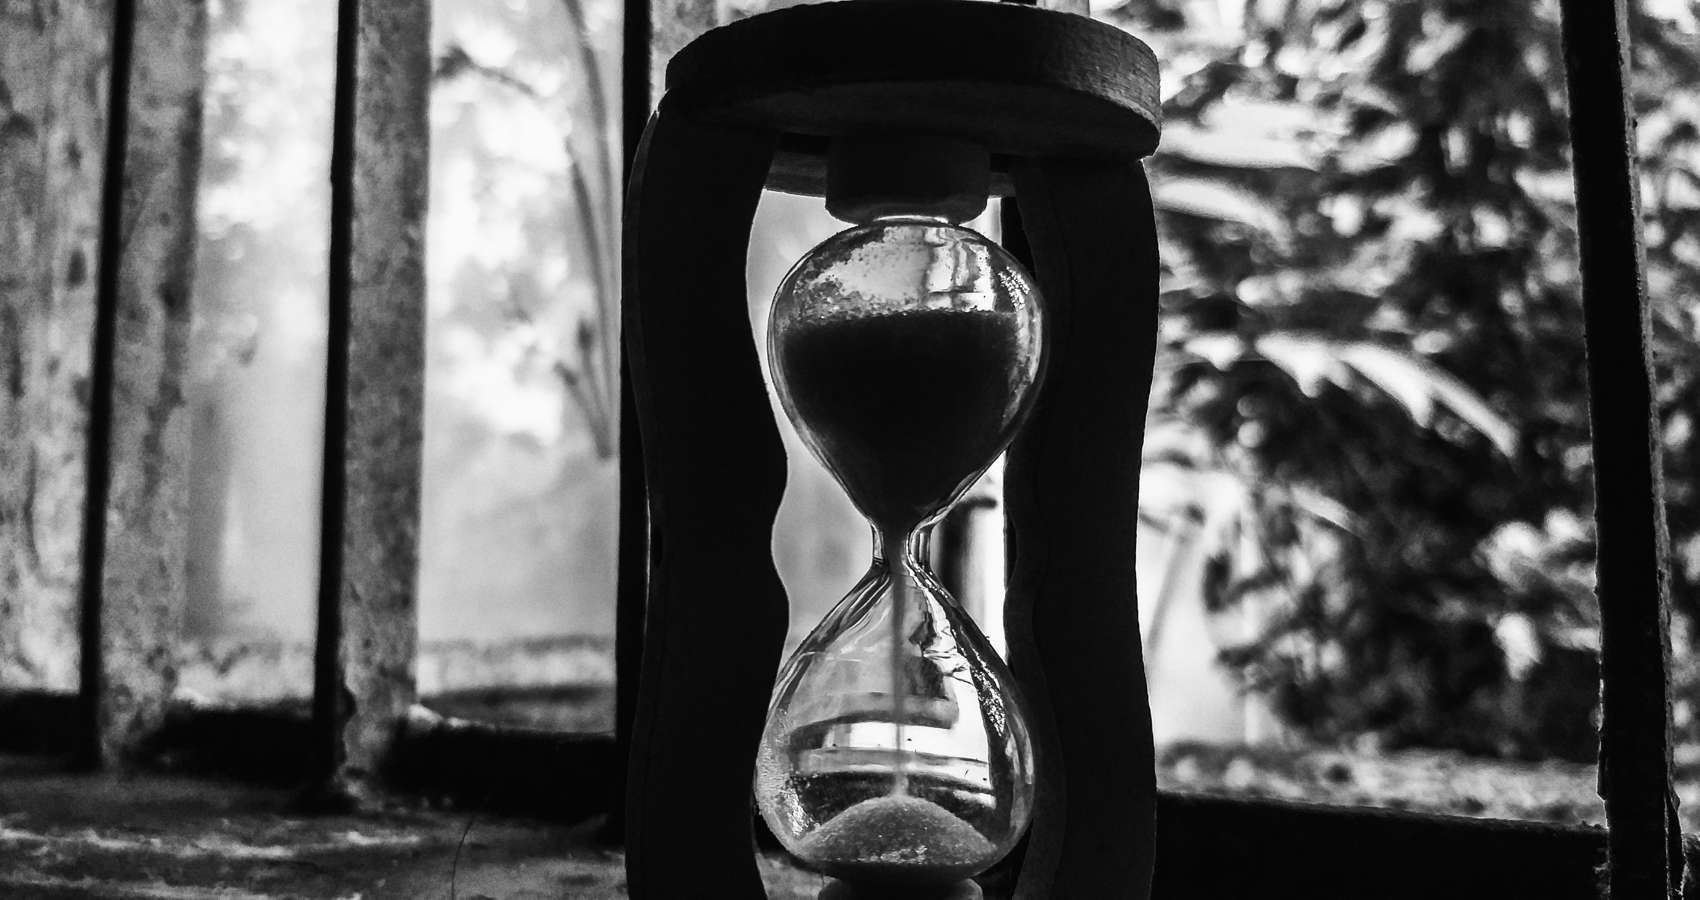 Hourglass, poetry by Brad Osborne at Spillwords.com